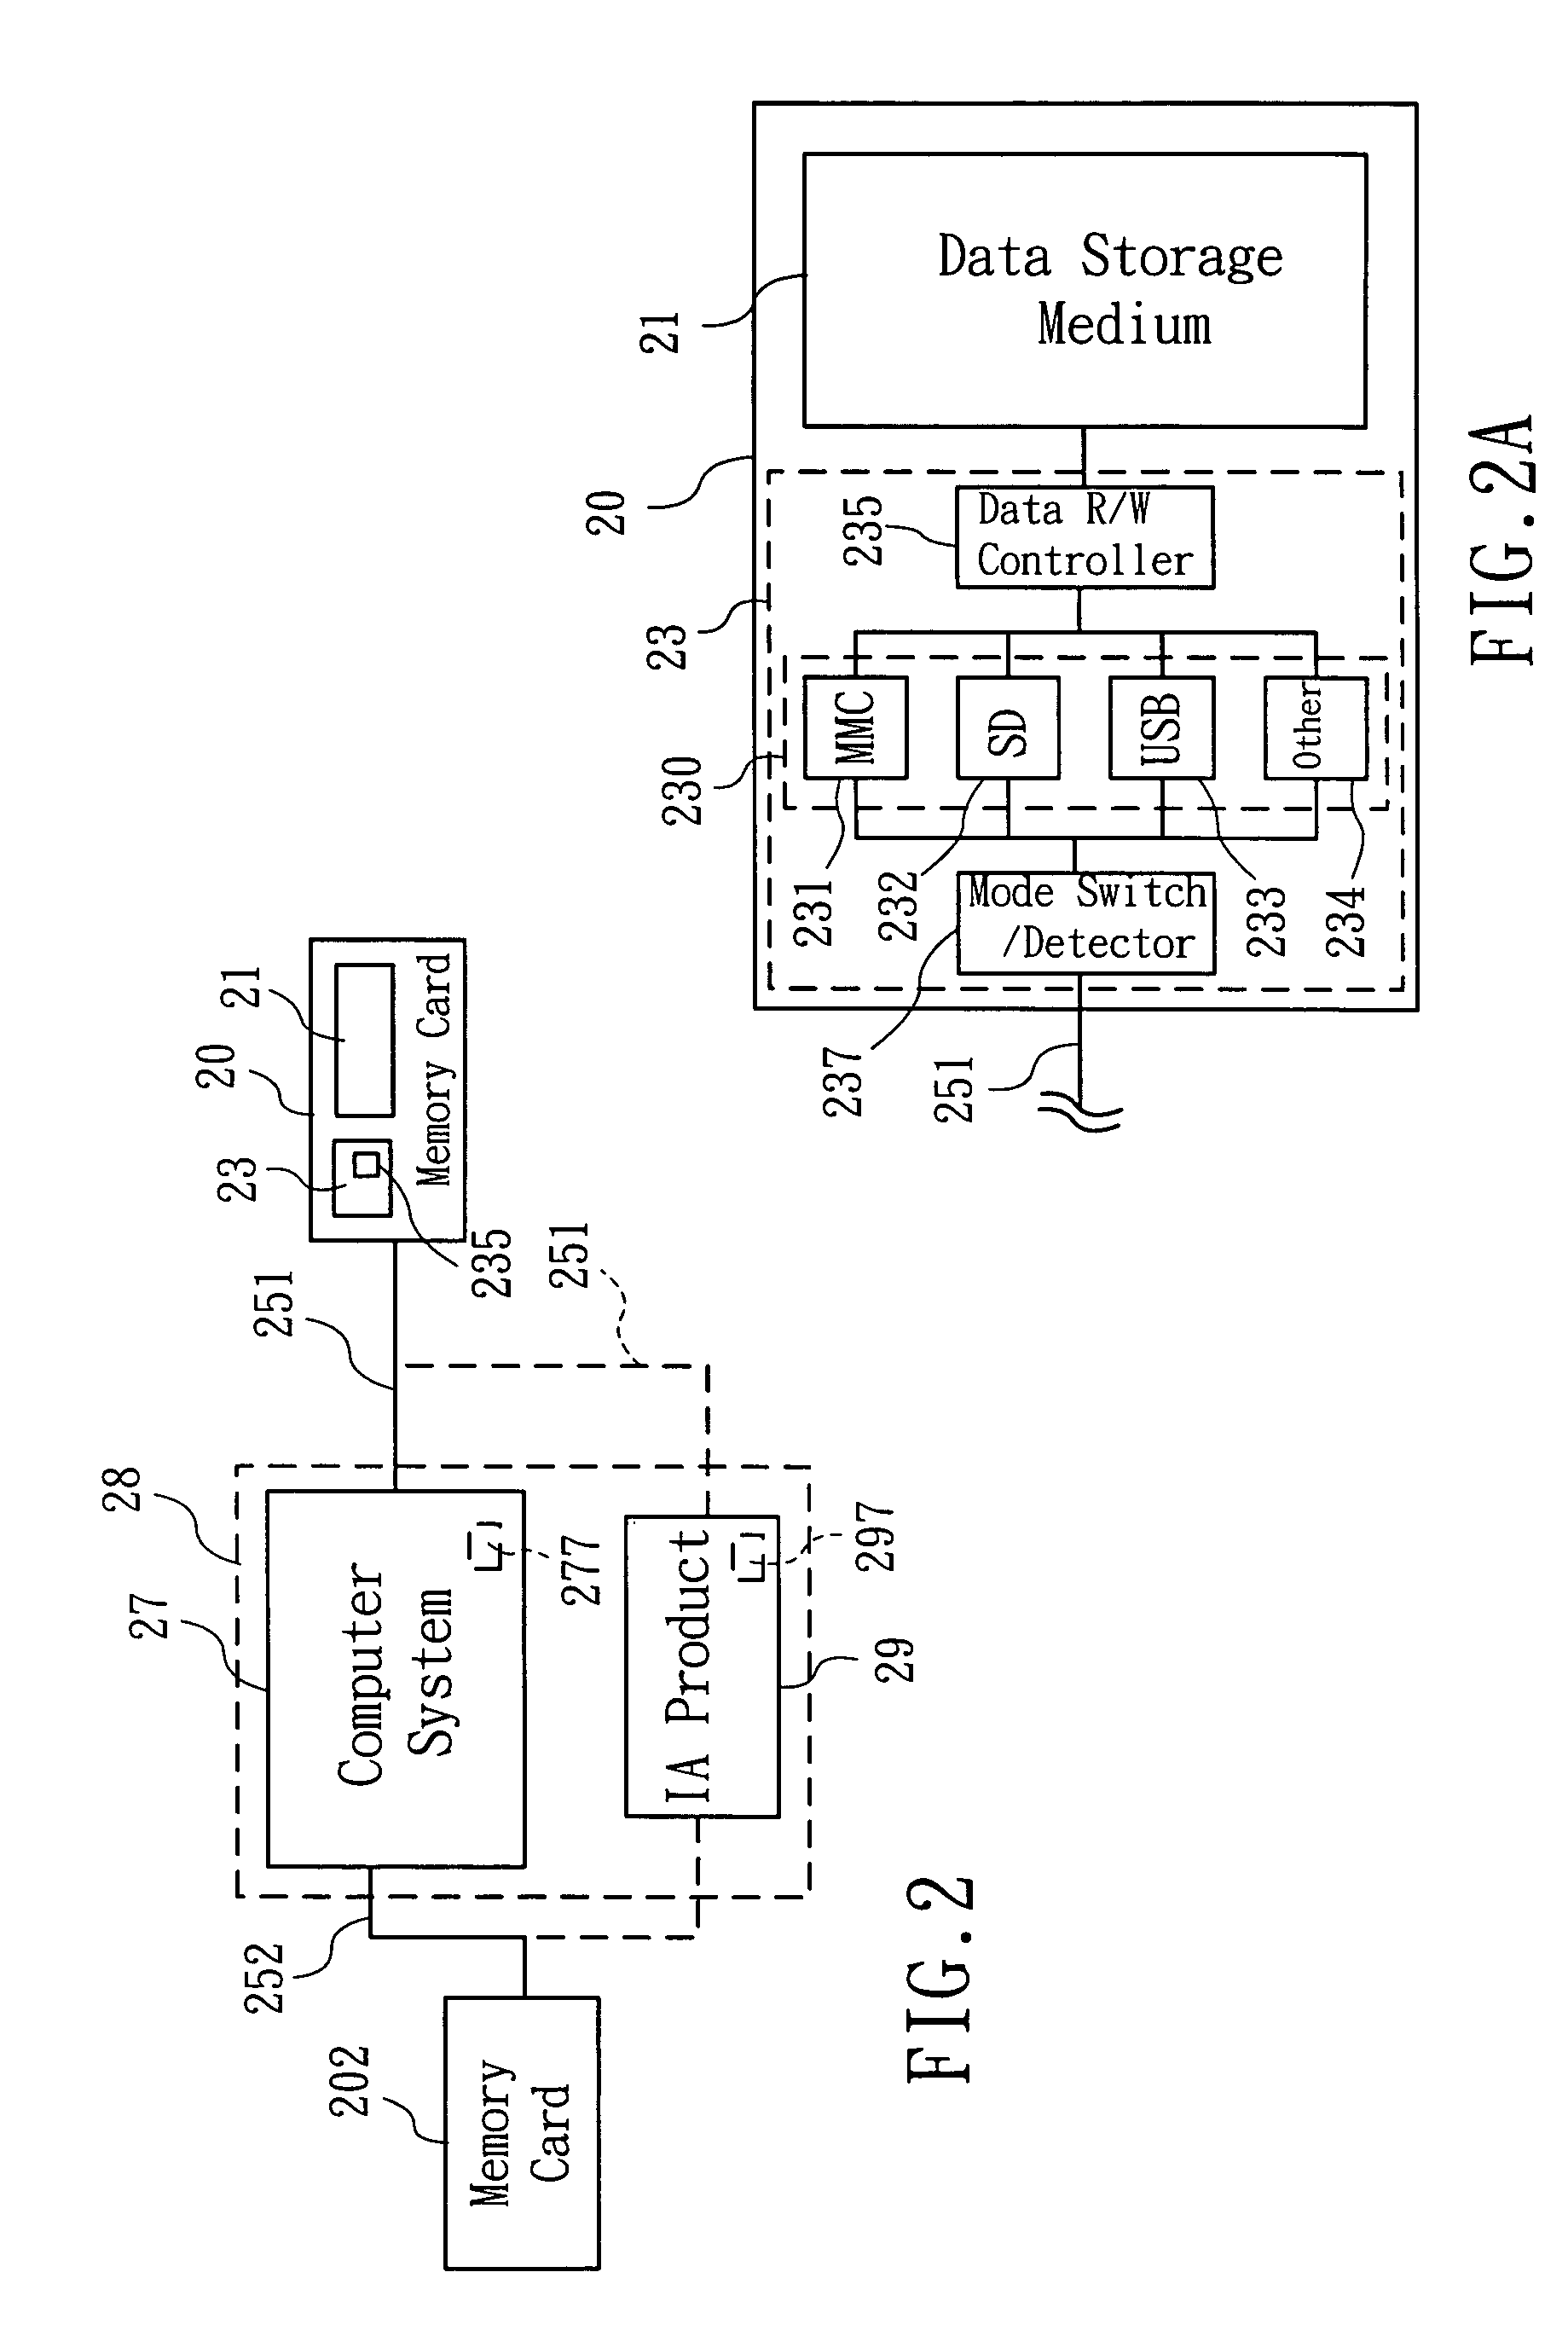 Method for determining transmitting mode of a memory card with multiple interface functions